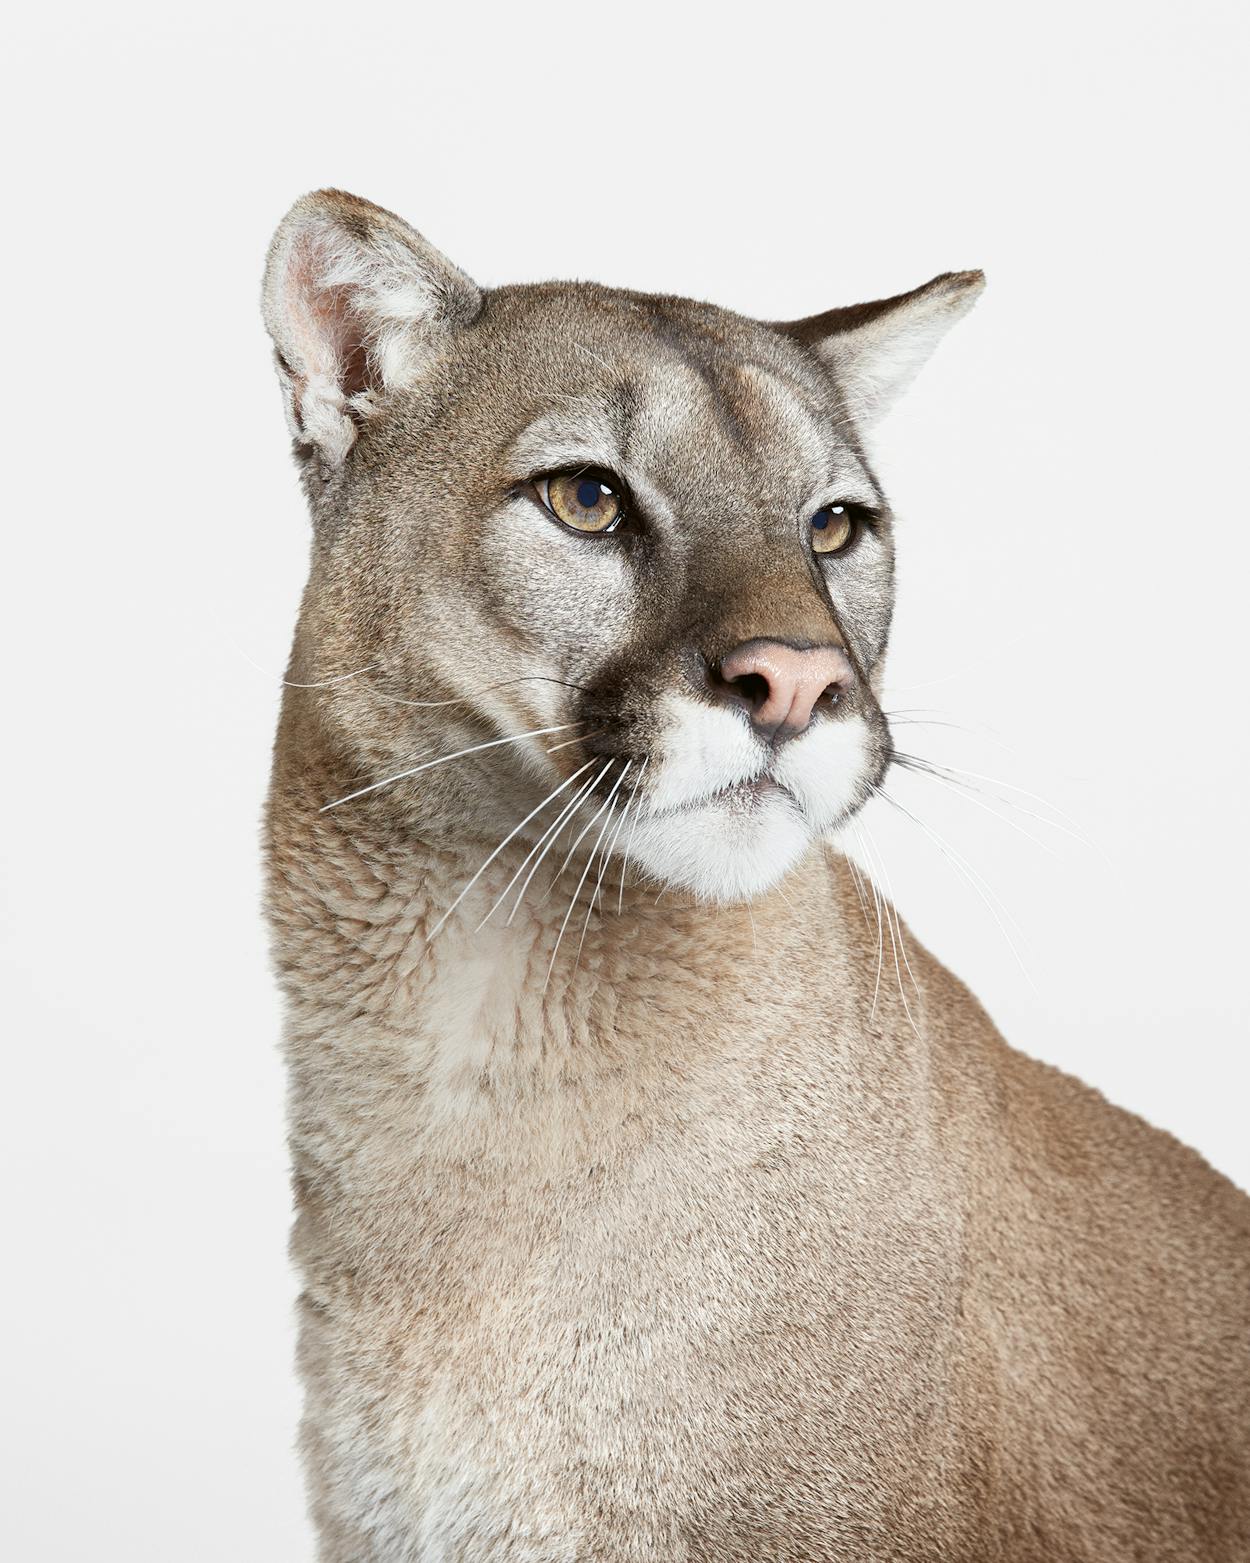 Dexter the mountain lion, photographed by Ford in studio.